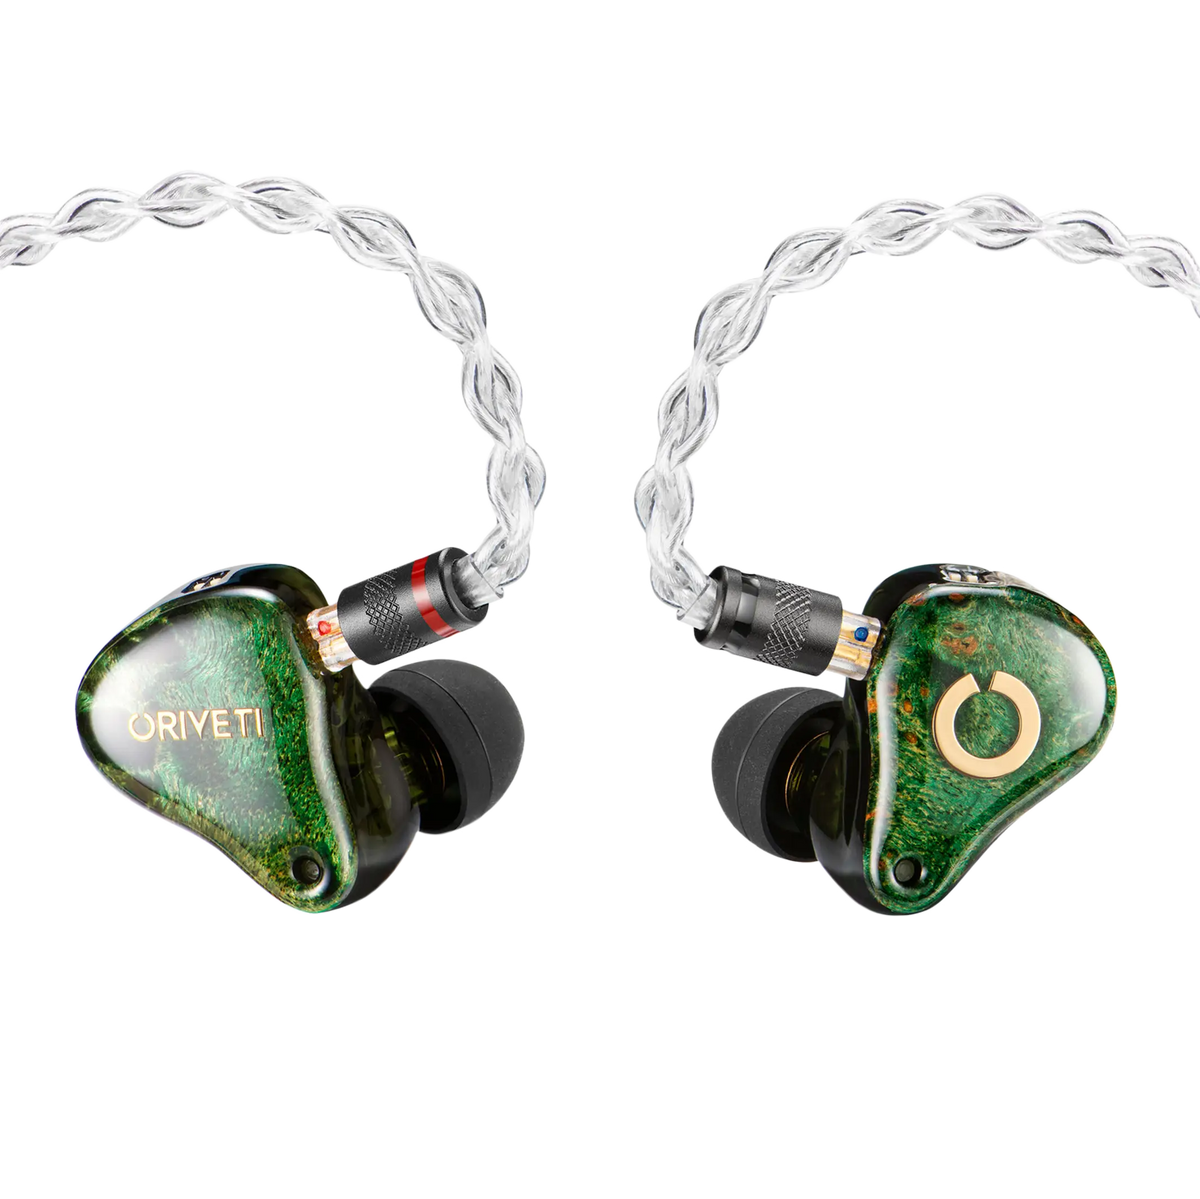 Oriveti OV800 Eight Drivers Balanced Armature IEM Earphones with Sound Mode Switch and Detachable Cable